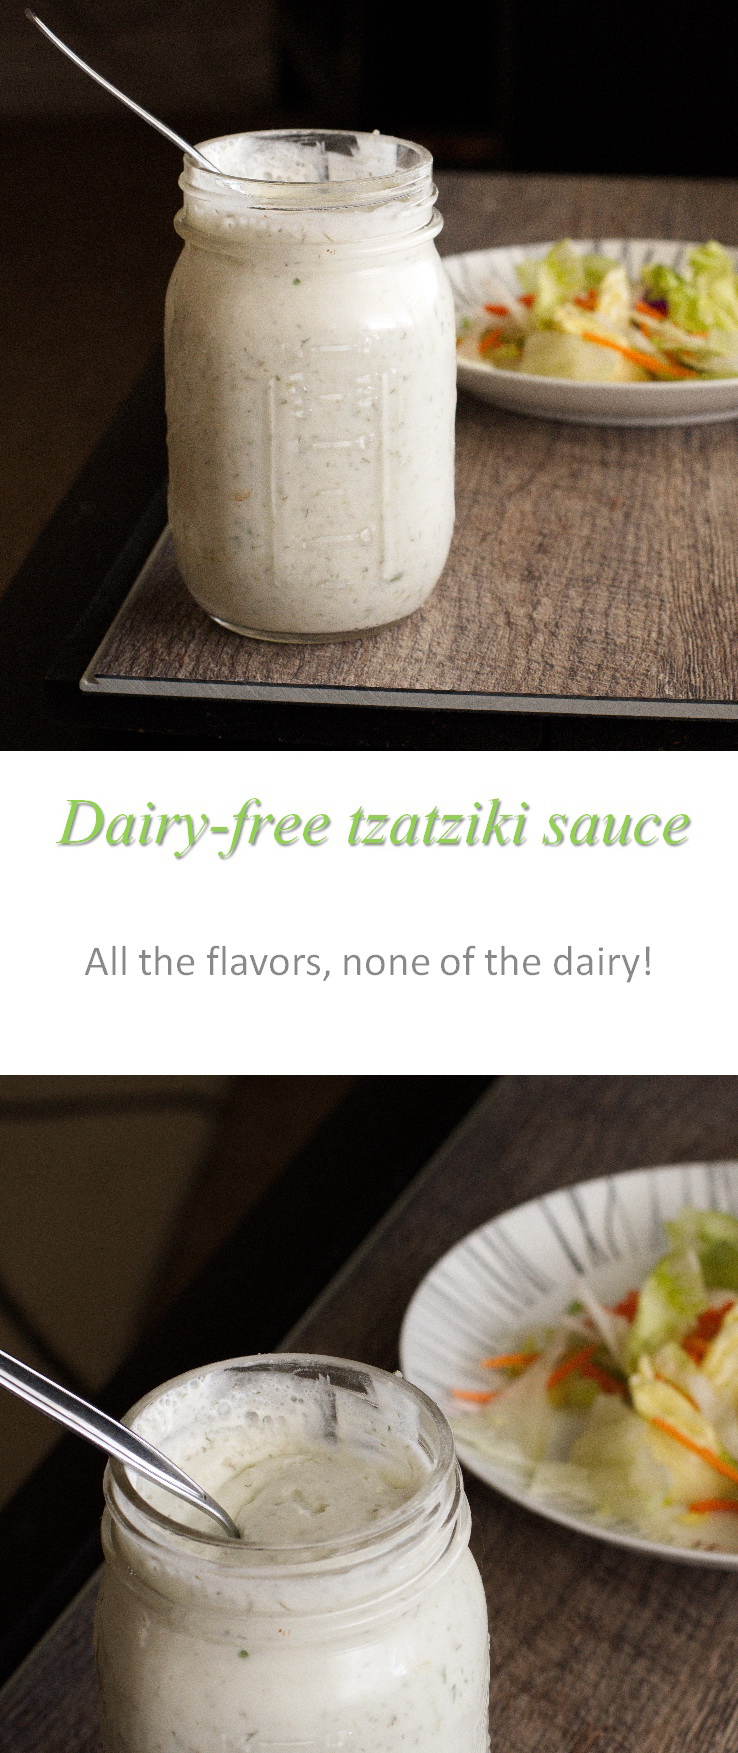 An awesome dairy-free tzatziki dressing for any salad, burger or just for dipping! #tzatziki #cookathome #glutenfree #dairyfree